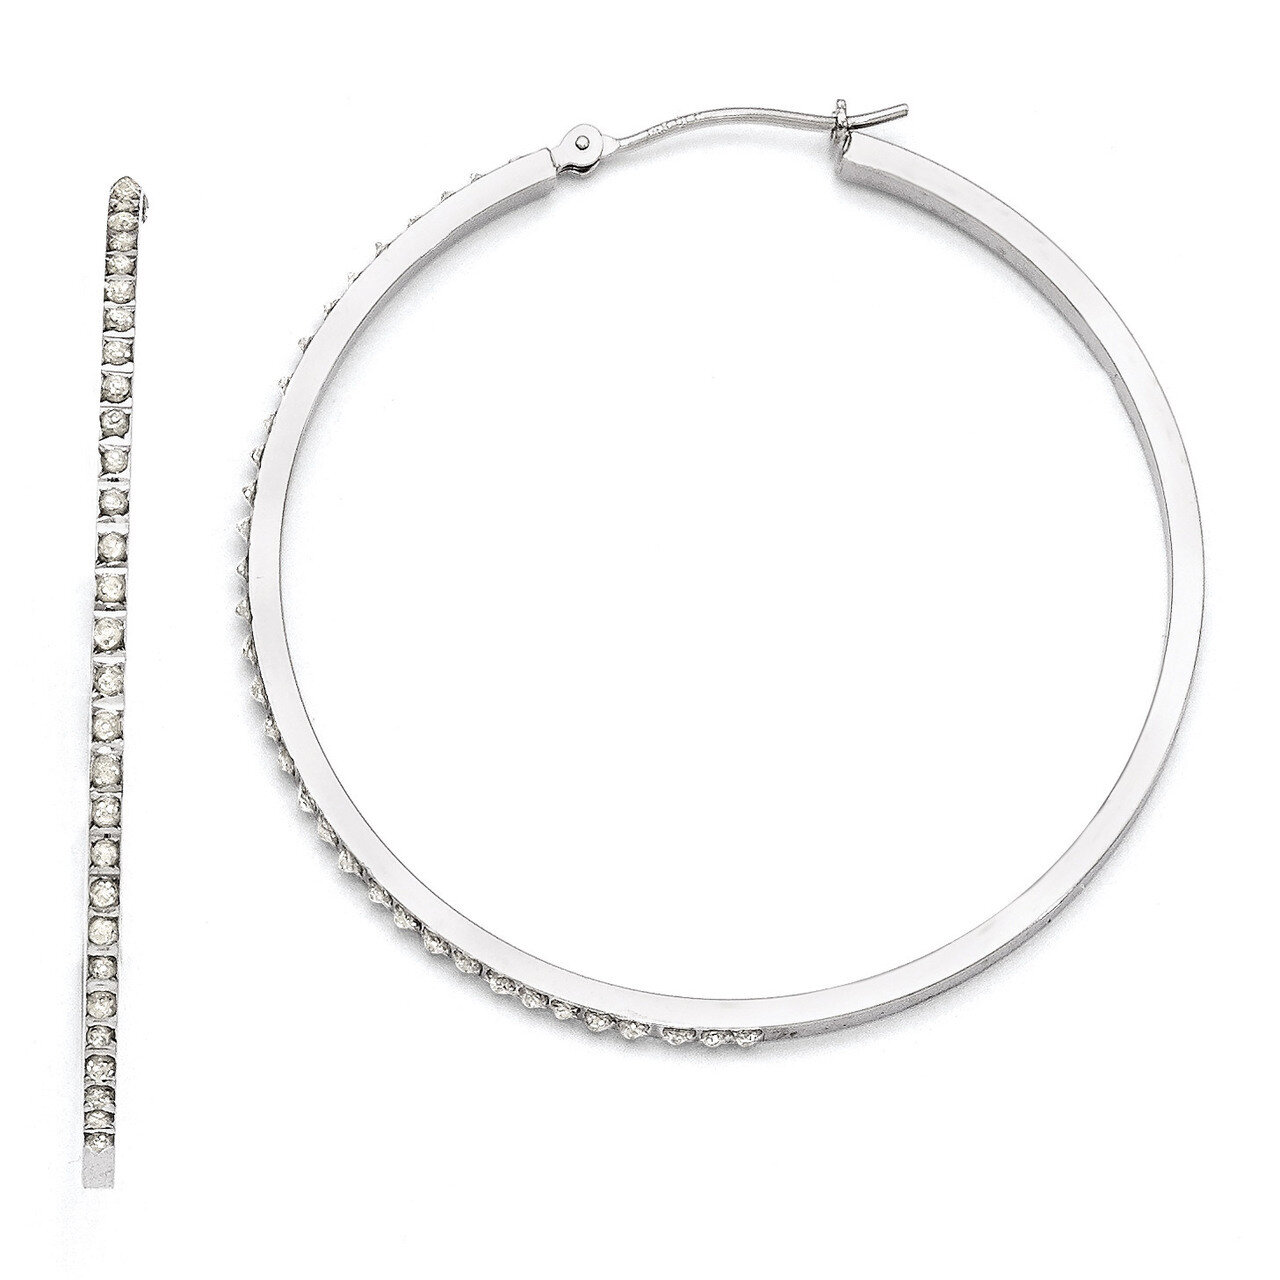 Lg Round Hinged Hoop Earrings 14k White Gold with Diamonds DF114